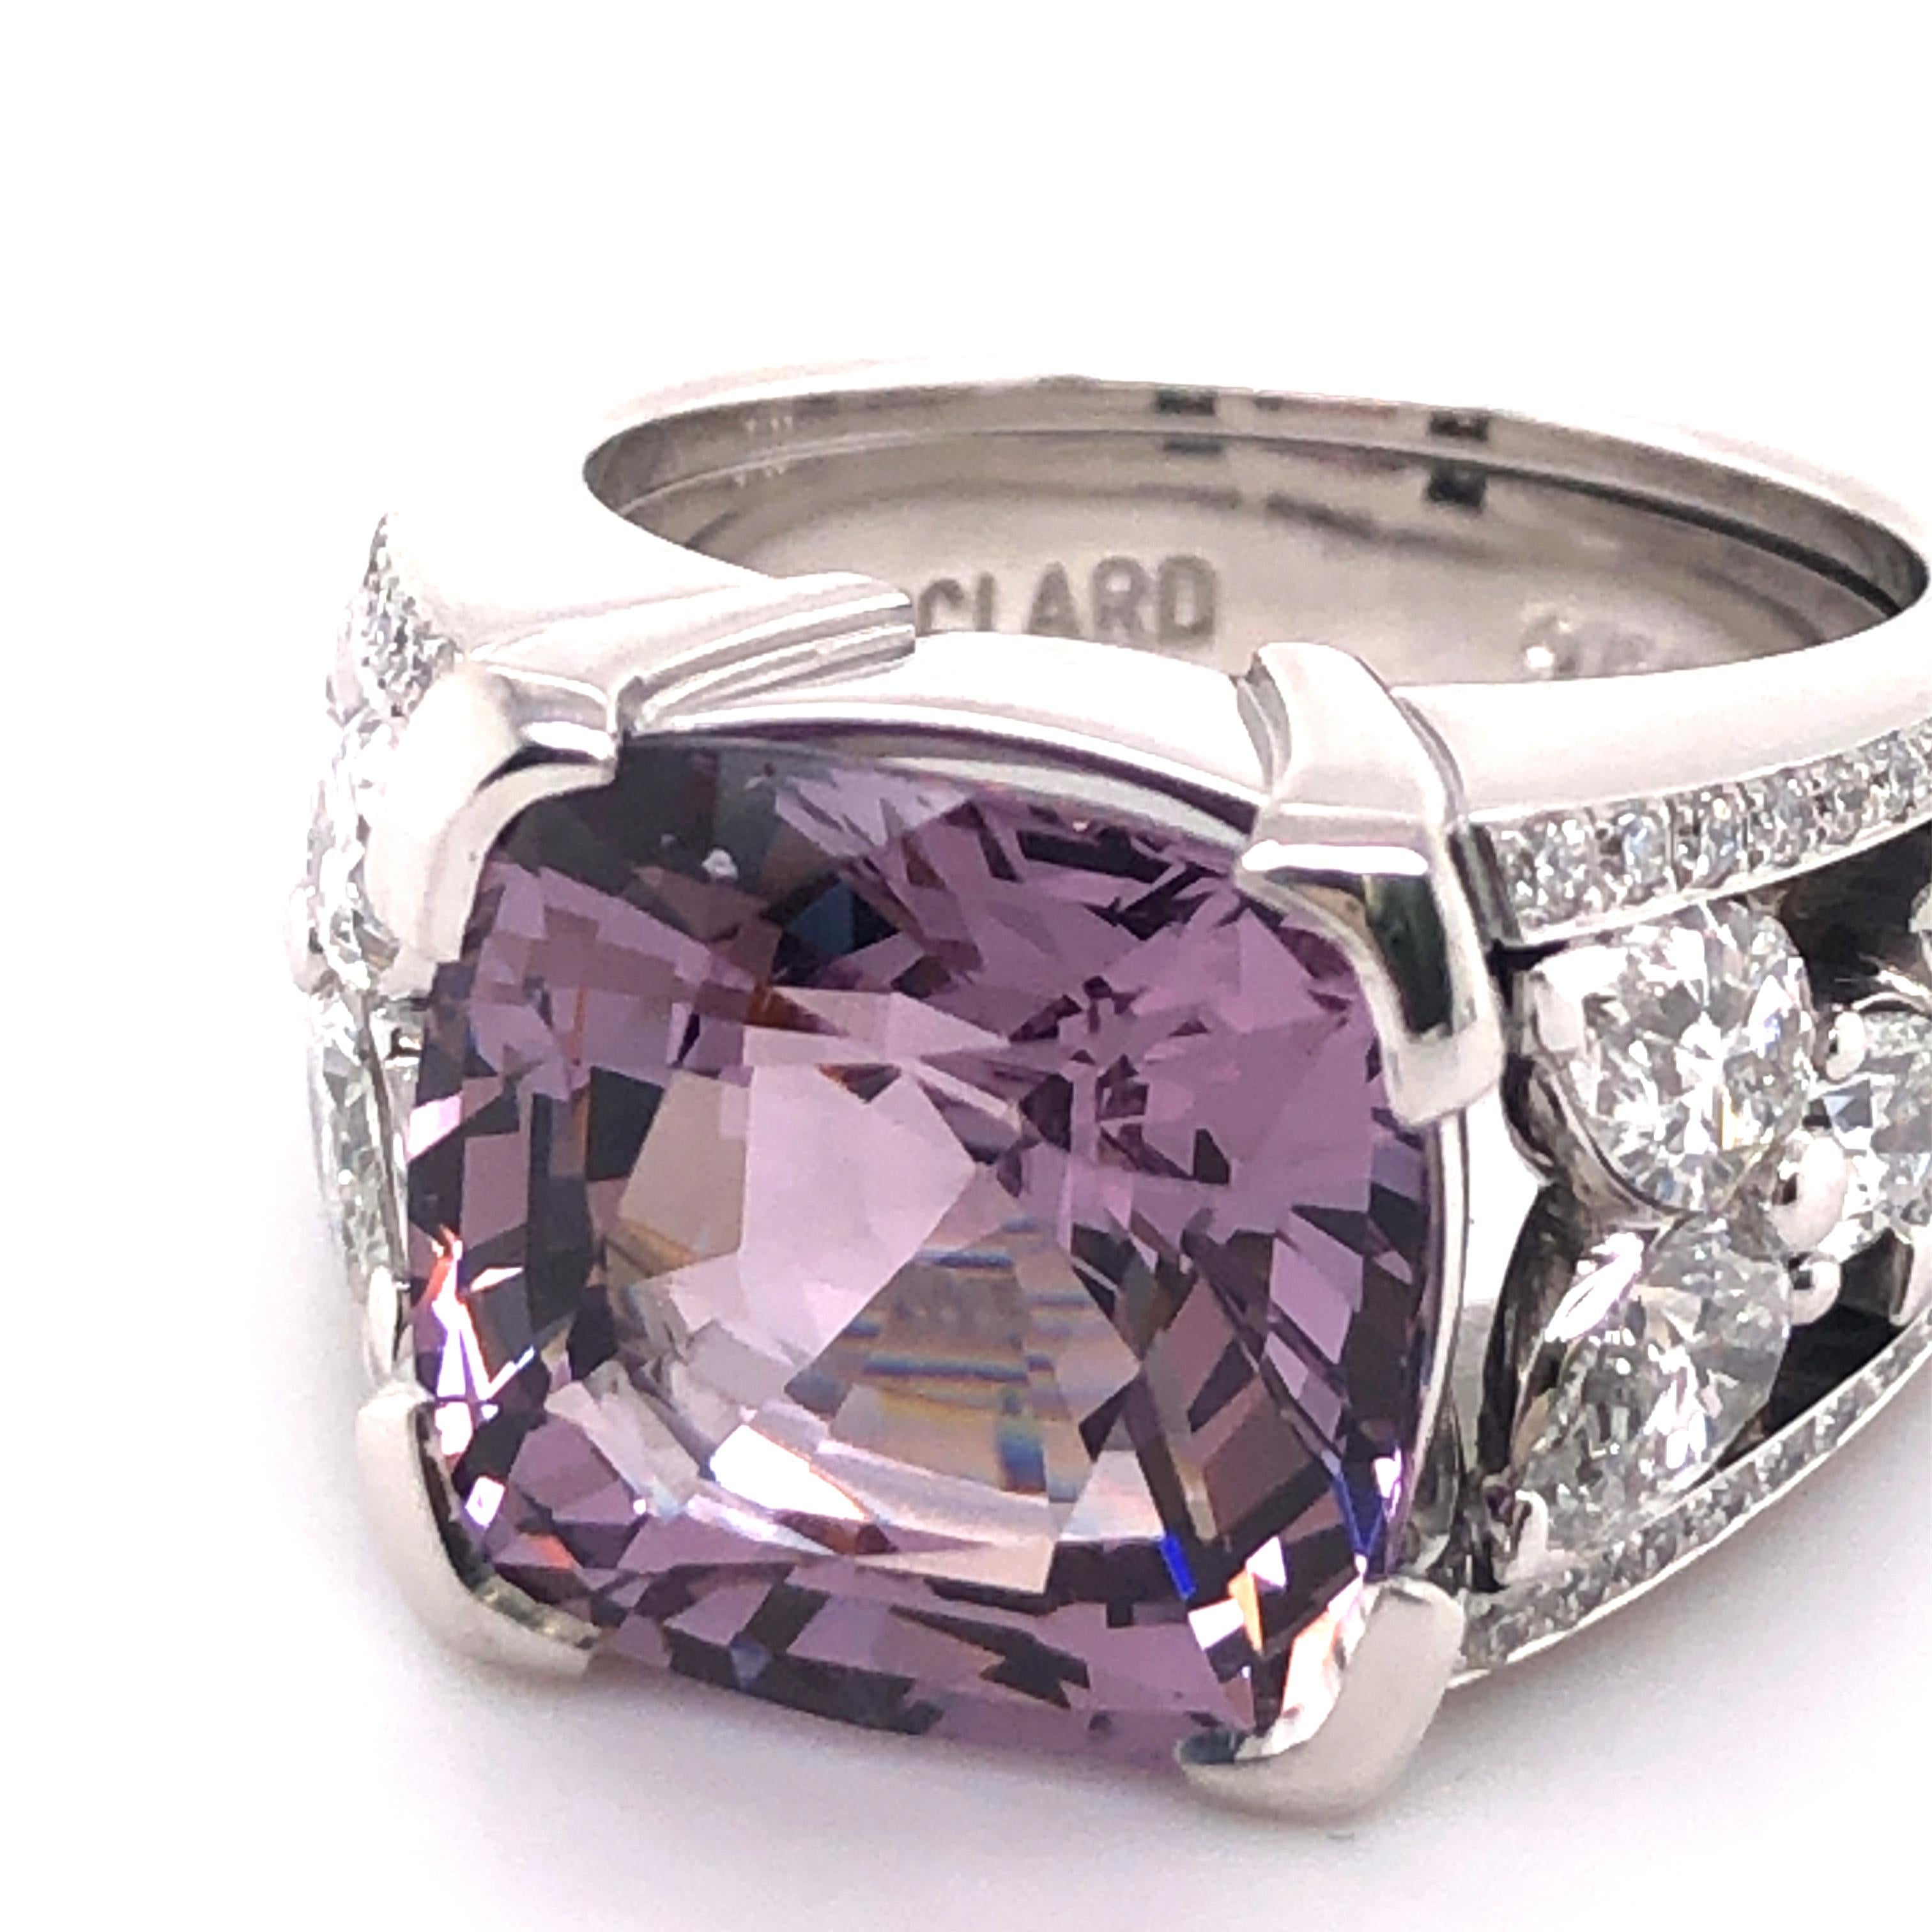 Contemporary Certified 8.90 Ct Violet Burmese Spinel and Diamond Ring in 18 Karat White Gold For Sale